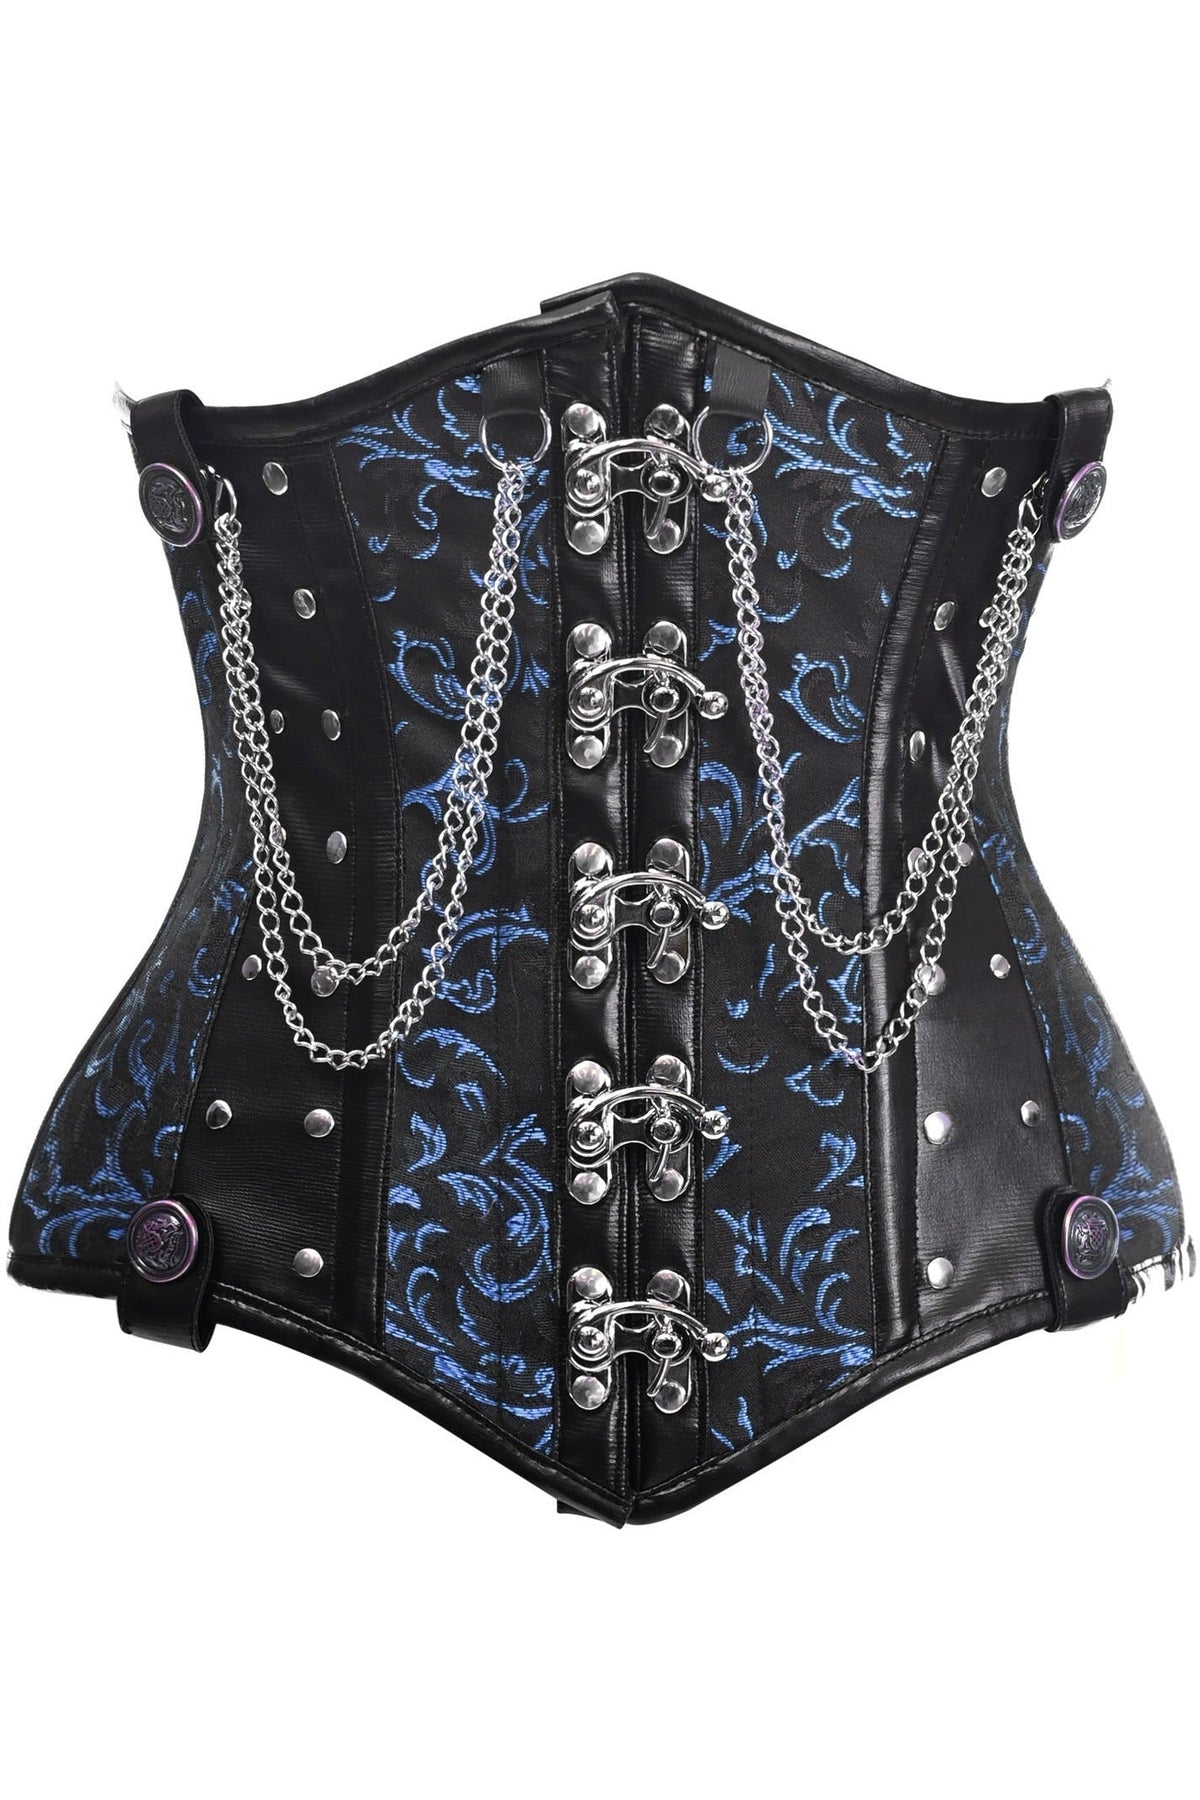 Top Drawer Black/Blue Steel Boned Underbust Corset w/Chains and